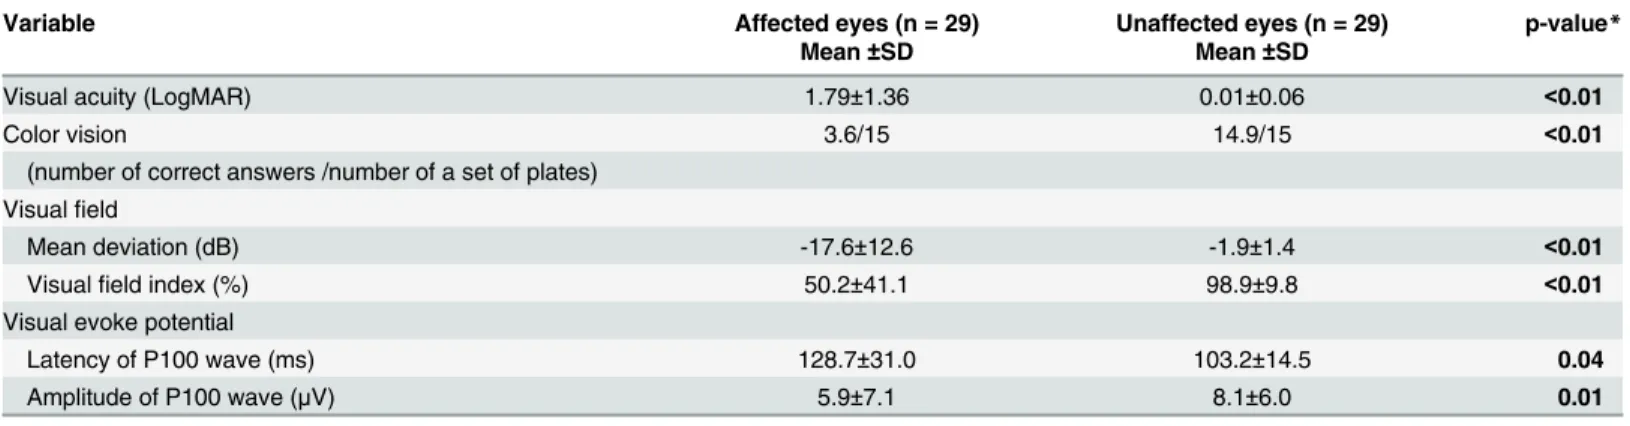 Table 2. Descriptive statistics of the functional and vision tests in all patients.